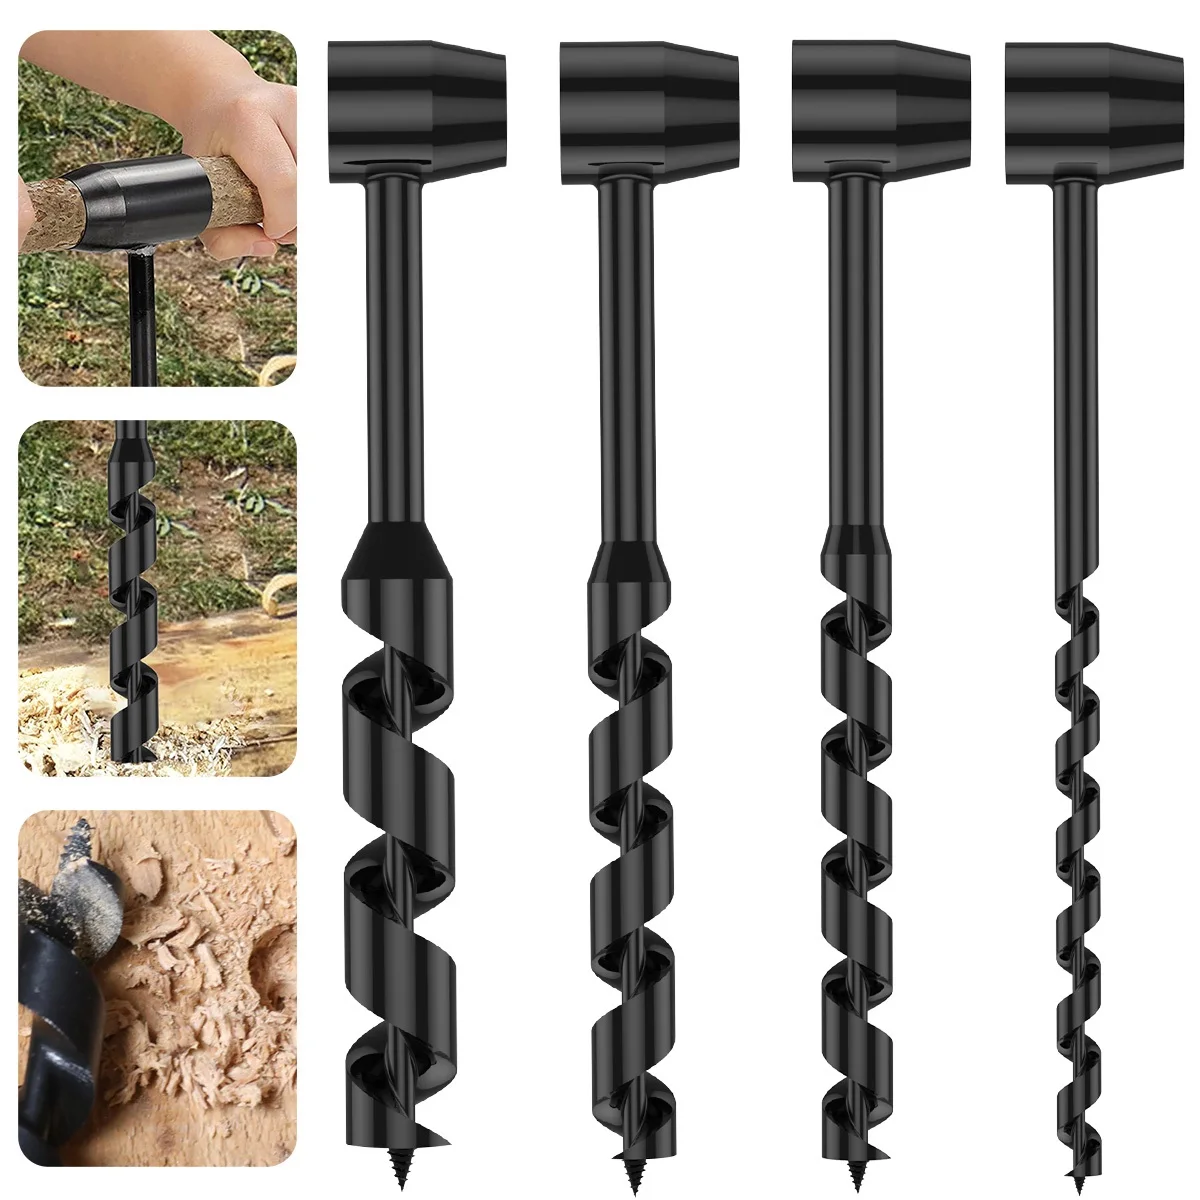 Auger Hand Drill Wrench Carbon Steel Manual Auger Drill Portable Manual Survival Drill Bit Self-Tapping Survival Wood Punch Tool